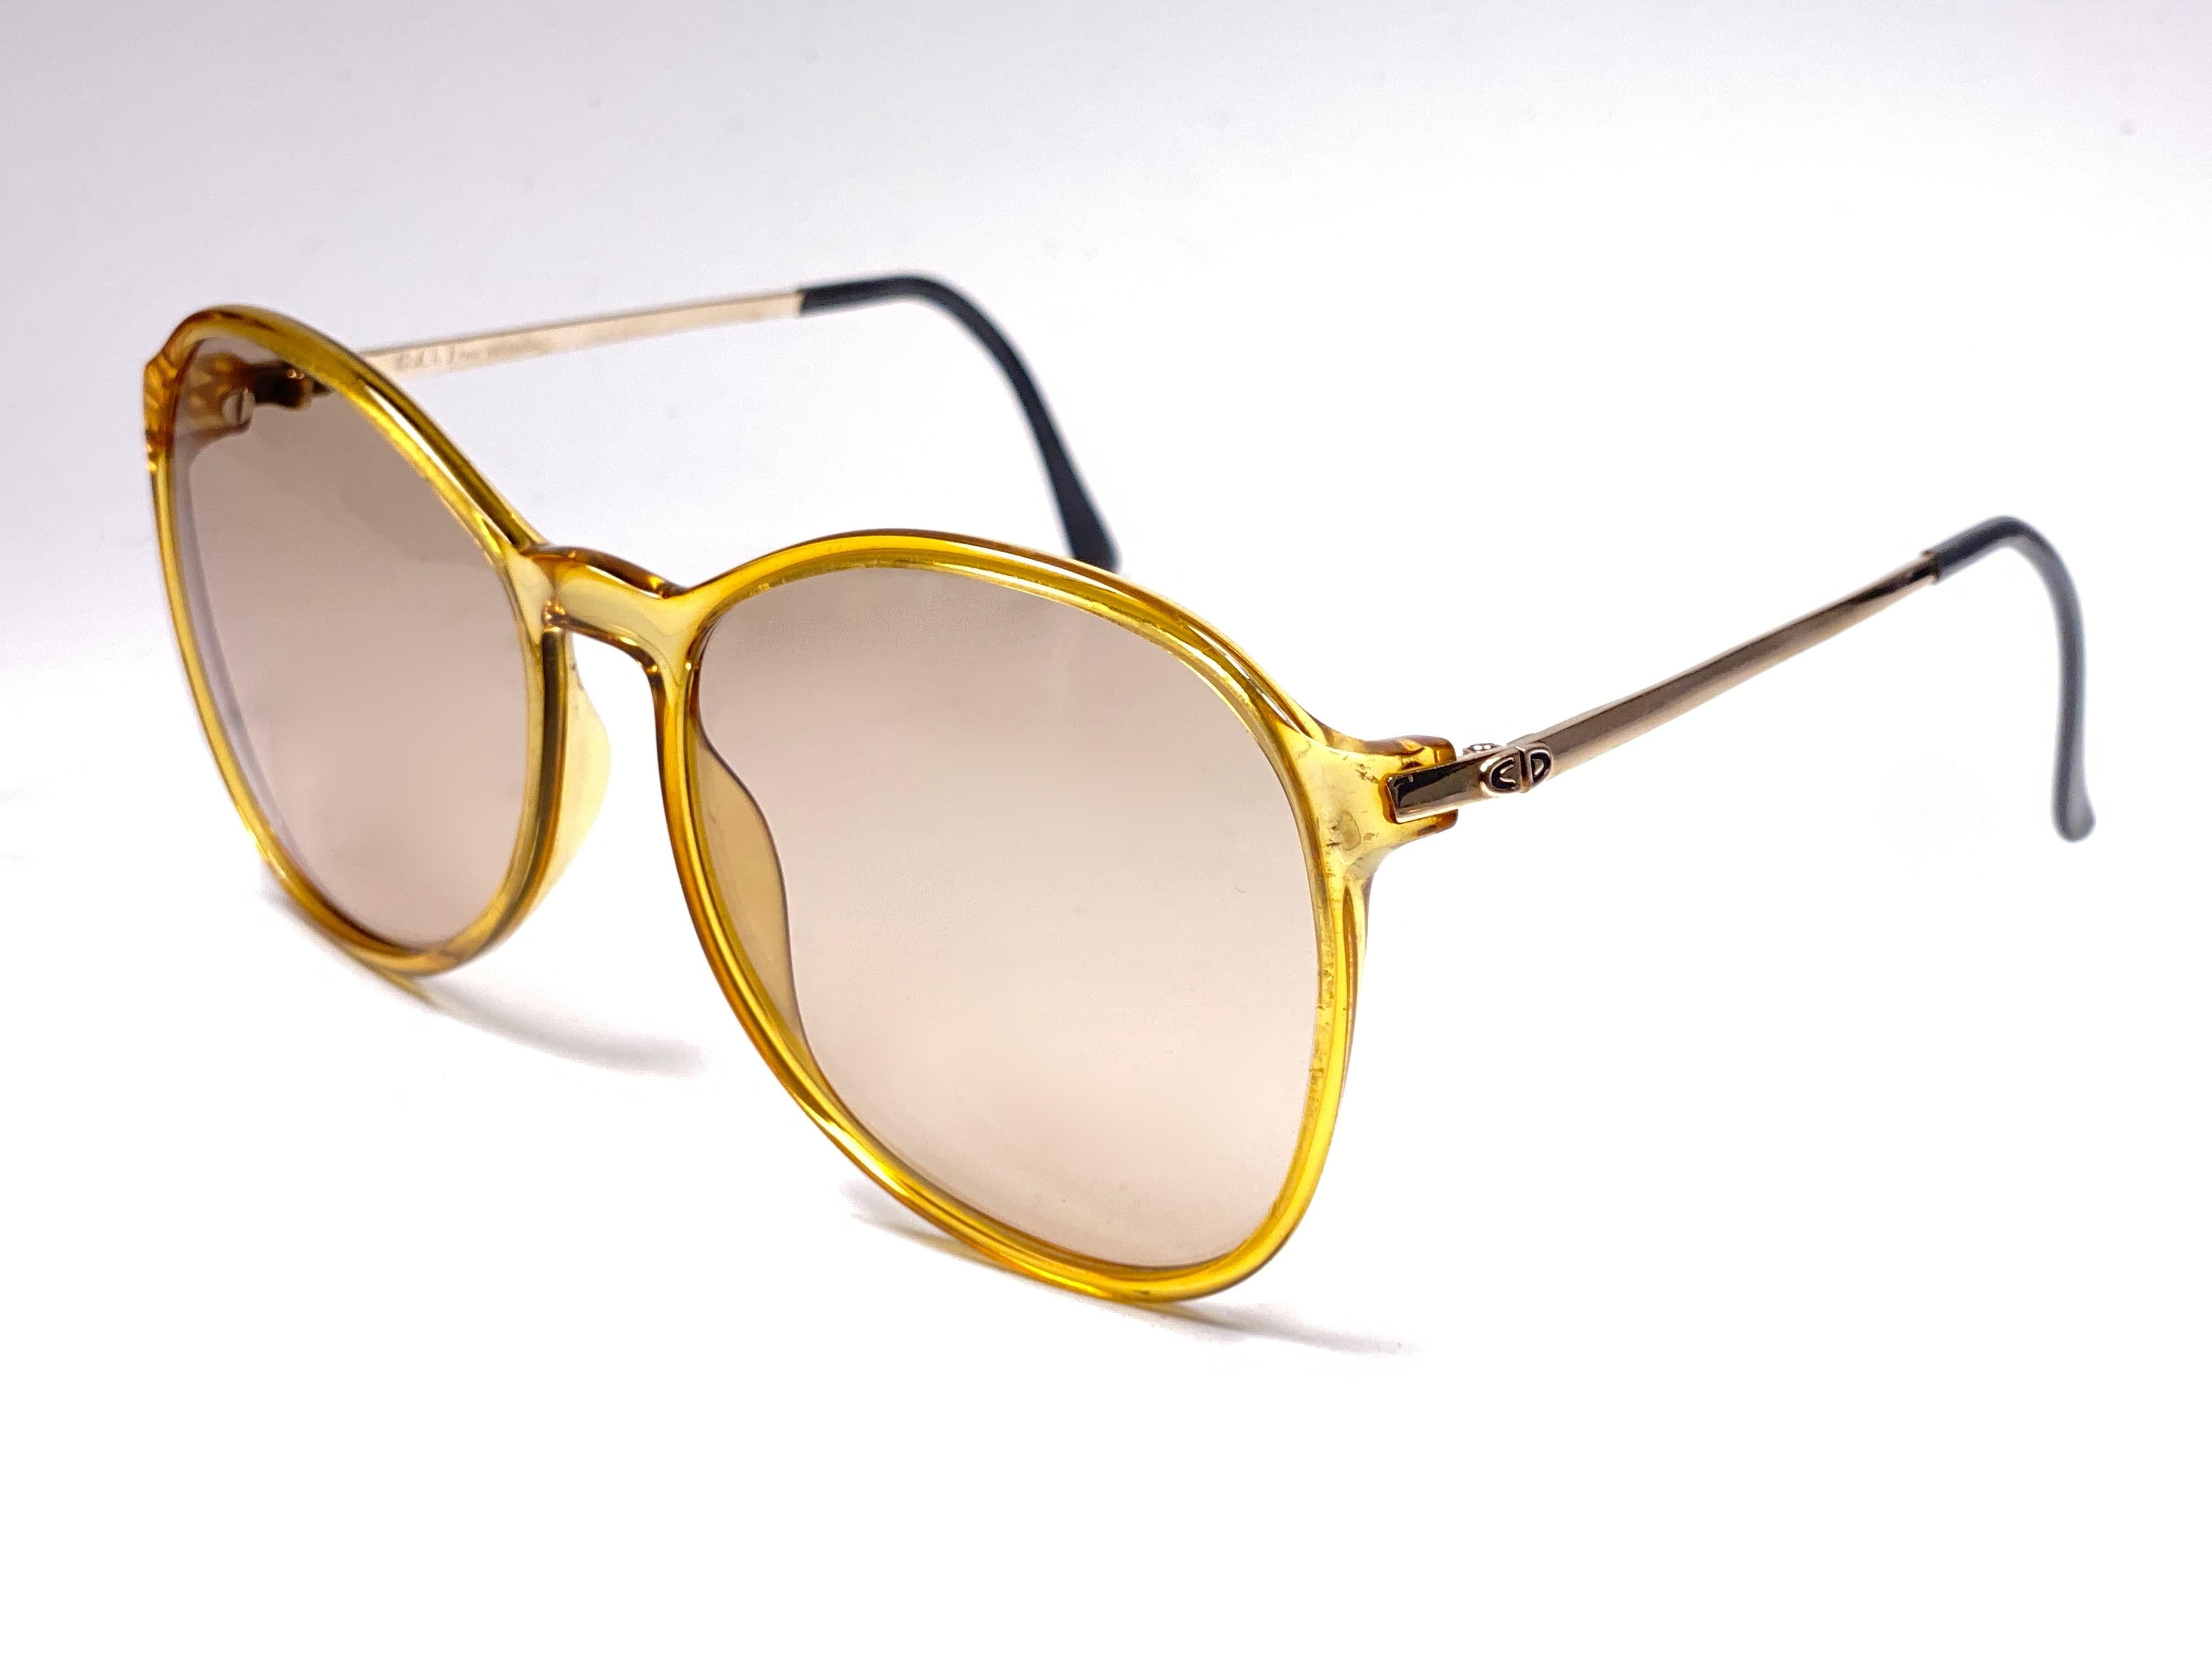 New Vintage Christian Dior Monsieur 2212 Sunglasses 1970's Austria In New Condition For Sale In Baleares, Baleares